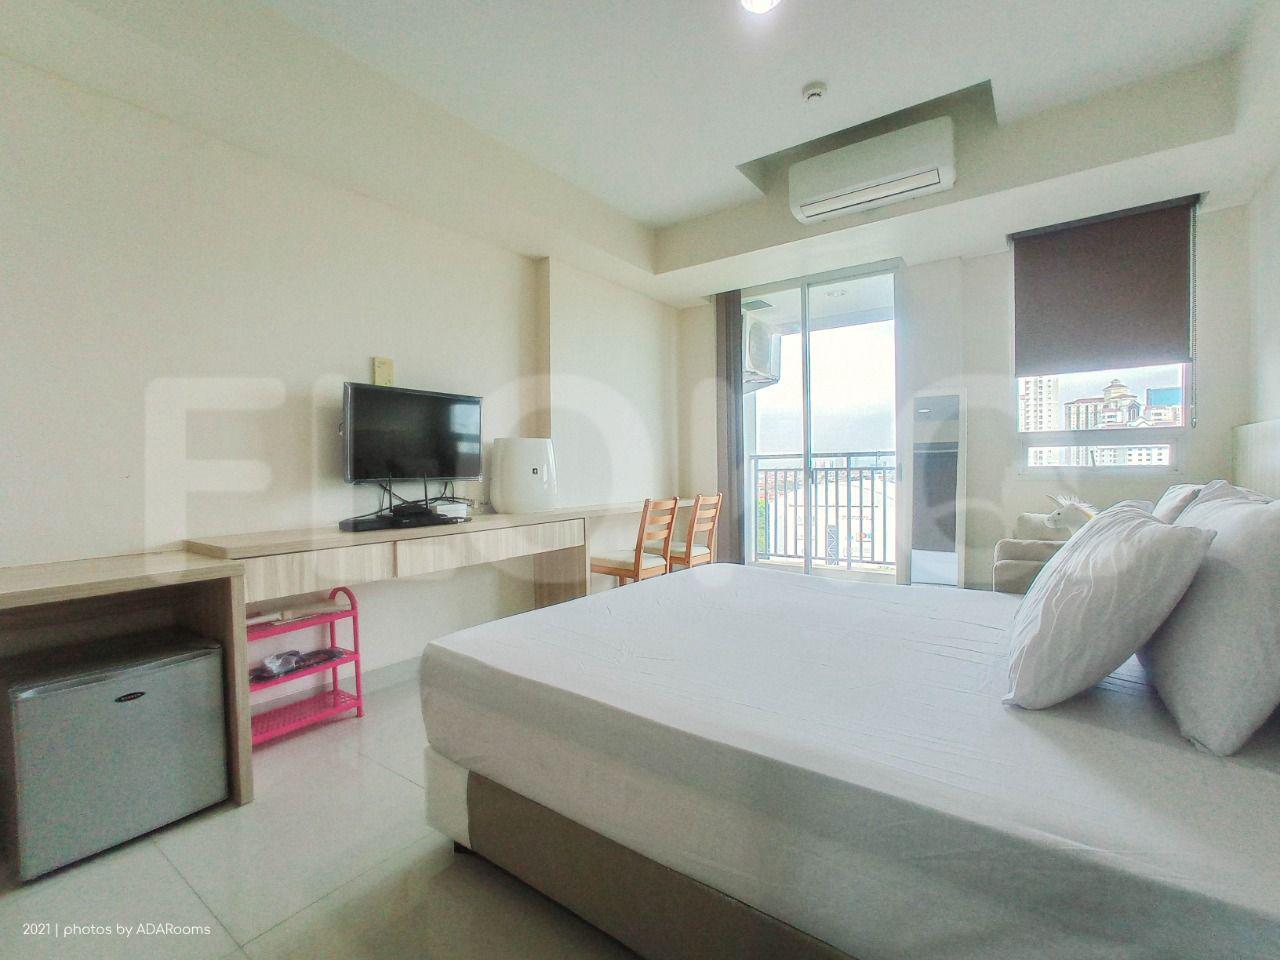 1 Bedroom on 11th Floor fpa6b1 for Rent in Springhill Terrace Residence